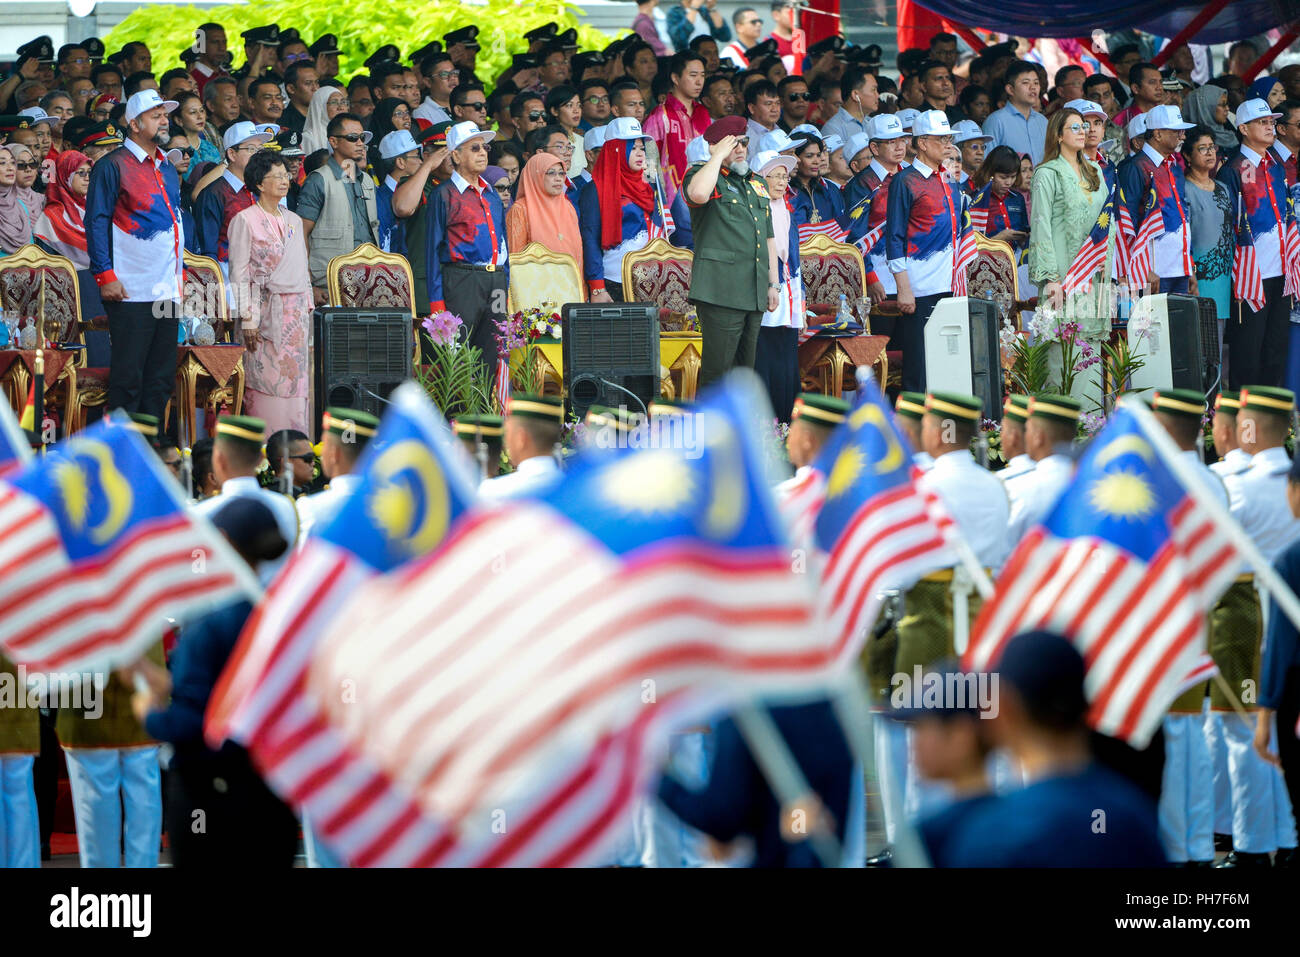 Putrajaya, Malaysia. 31st Aug, 2018. Malaysia's Supreme Head of State Muhammad V (C) takes part in the 61st National Day celebrations in Putrajaya, Malaysia, on Aug. 31, 2018. Credit: Chong Voon Chung/Xinhua/Alamy Live News Stock Photo